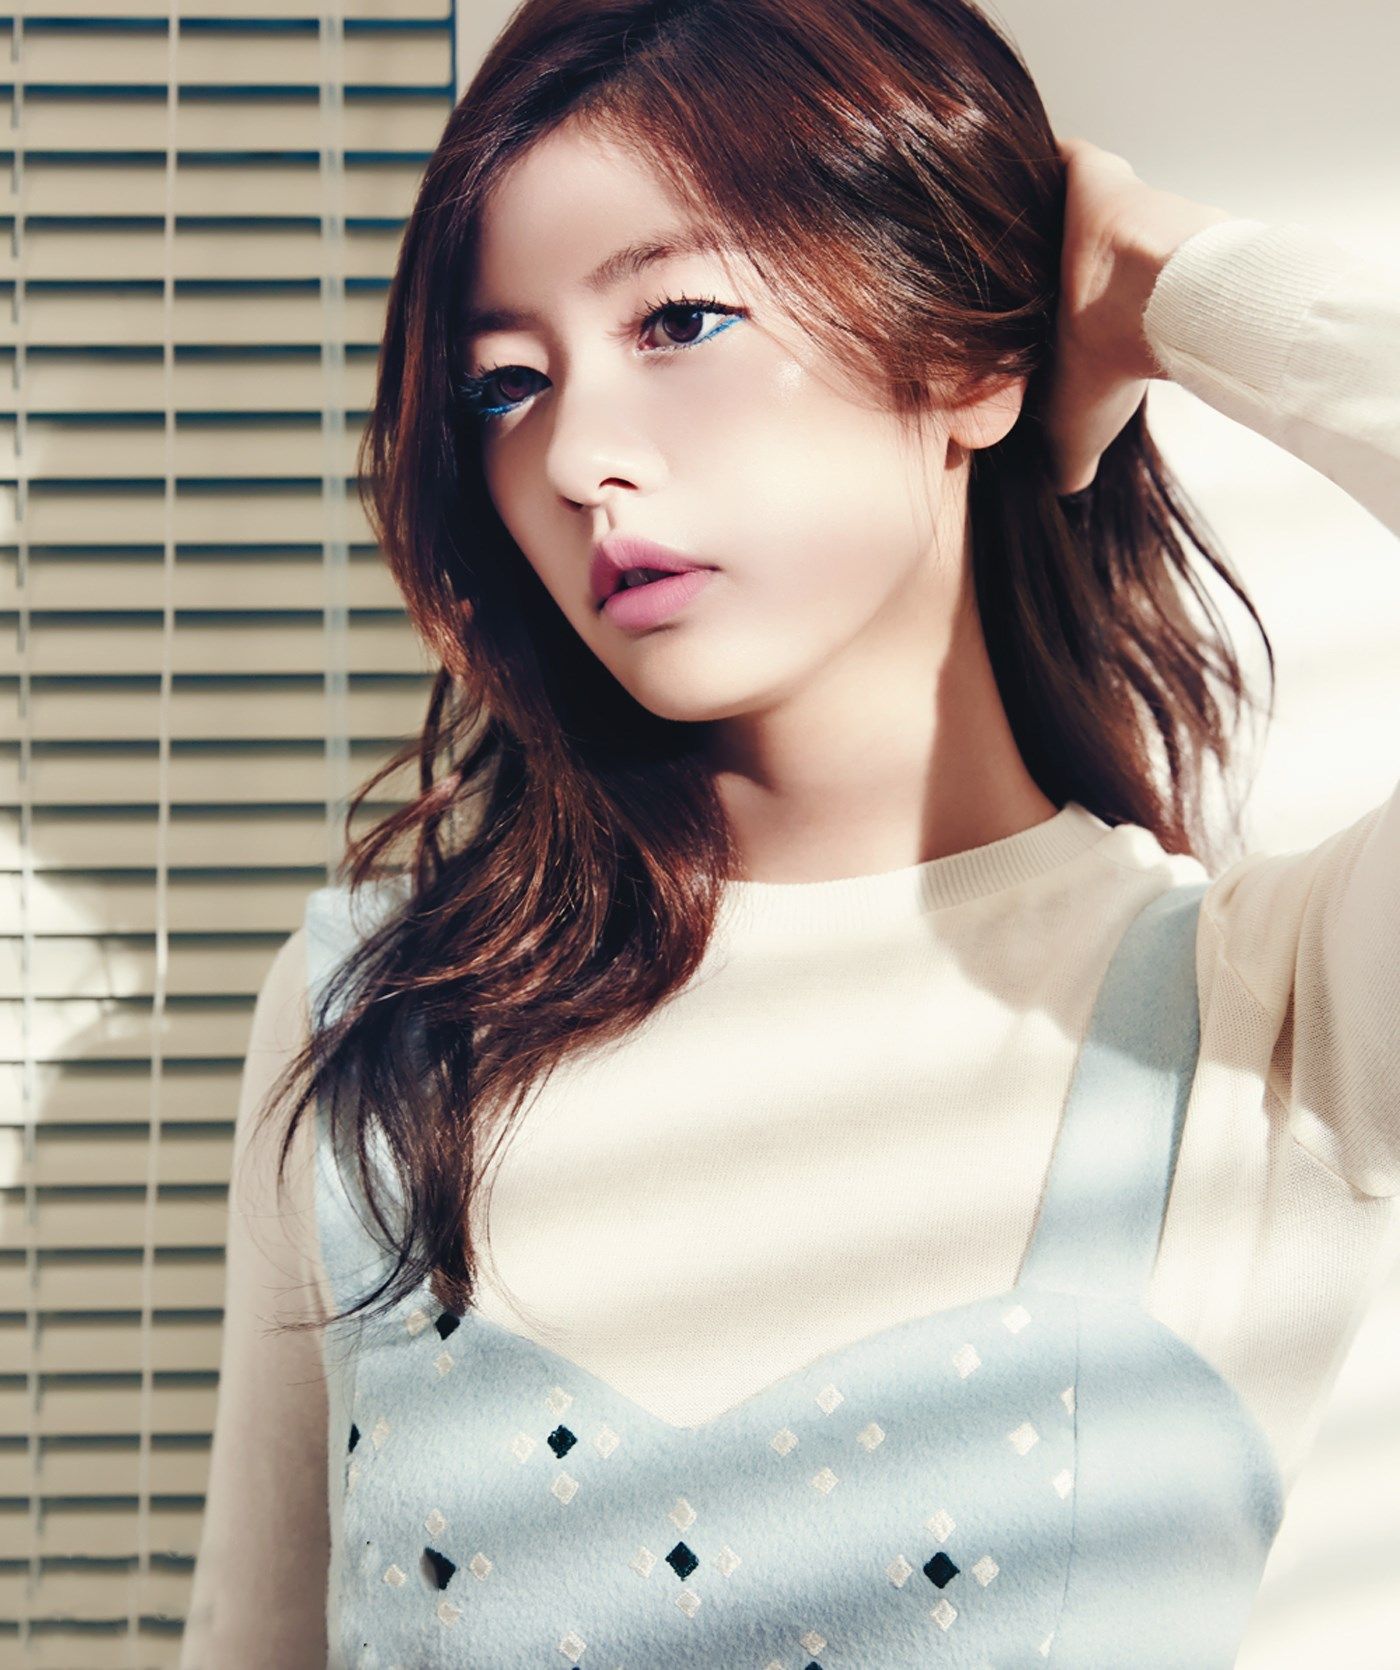 Jung So Min. Known people people news and biographies